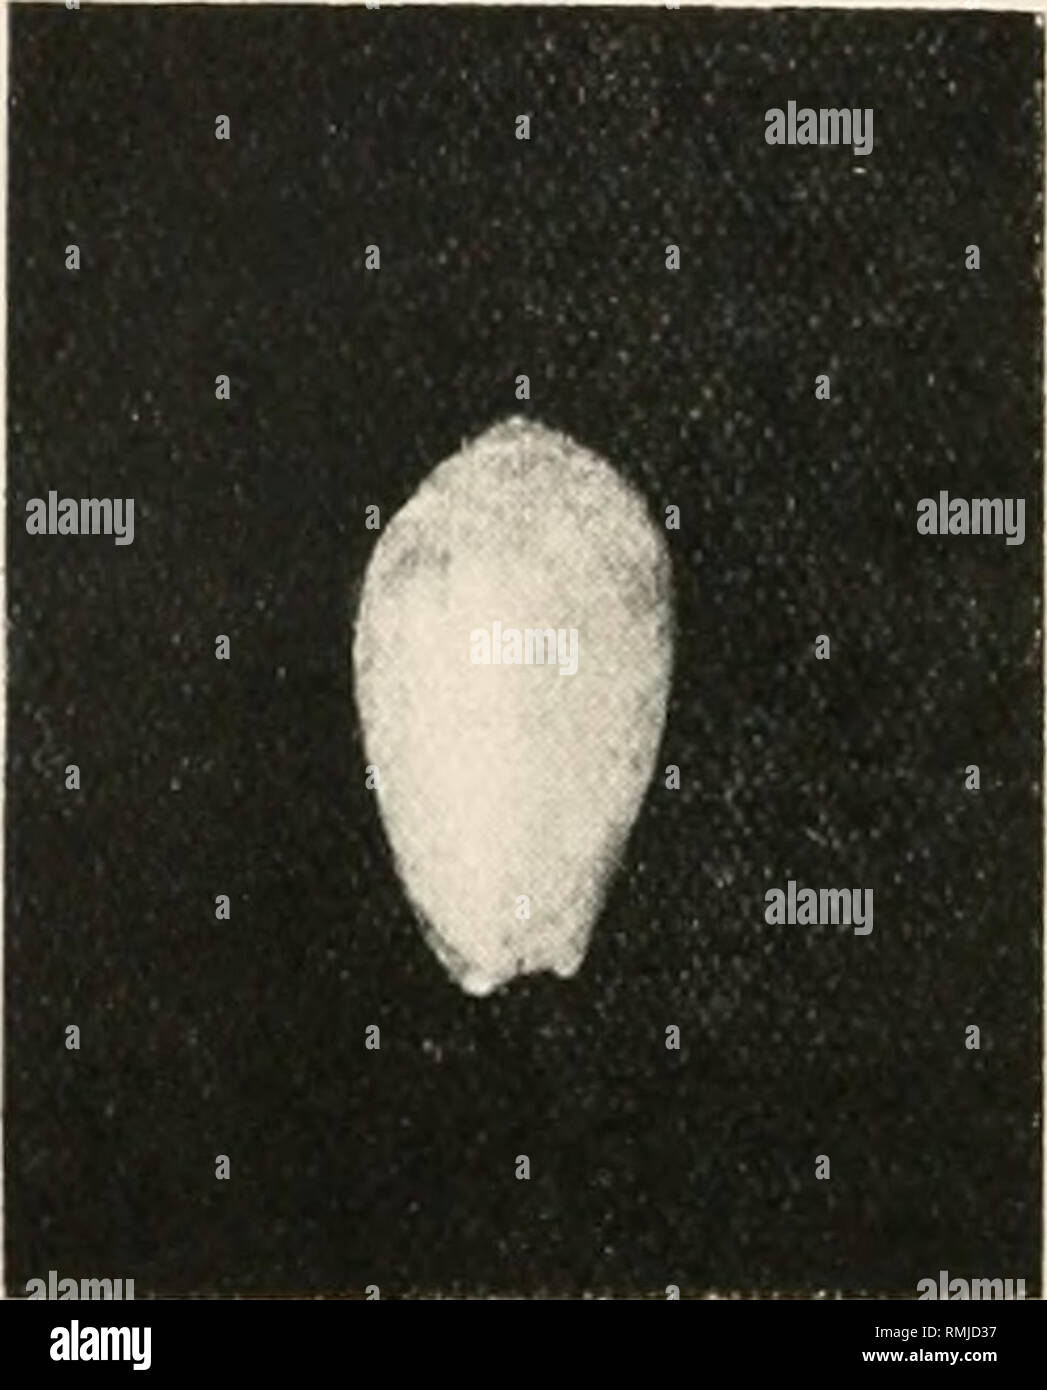 . Annals of the South African Museum. Annale van die Suid-Afrikaanse Museum. Natural history. J.S. Gladstone, phuto. FIG. 3.—Marginella taylori. x 4. J. S. Gladstone, photo. FlG. 4.—Marginella taylori. x 4. Coluninella covered with a thin callus, with seven plaits, somewhat oblique, the three uppermost almost obsolete, the others well defined and rather far apart, the penultimate the largest, the last very oblique. Aperture narrow for two-fifths of the upper part, thence widening as far as the base. Length of aperture 4 mm. ; greatest width 5 mm. Labrum moderately curved, thickened, finely lir Stock Photo